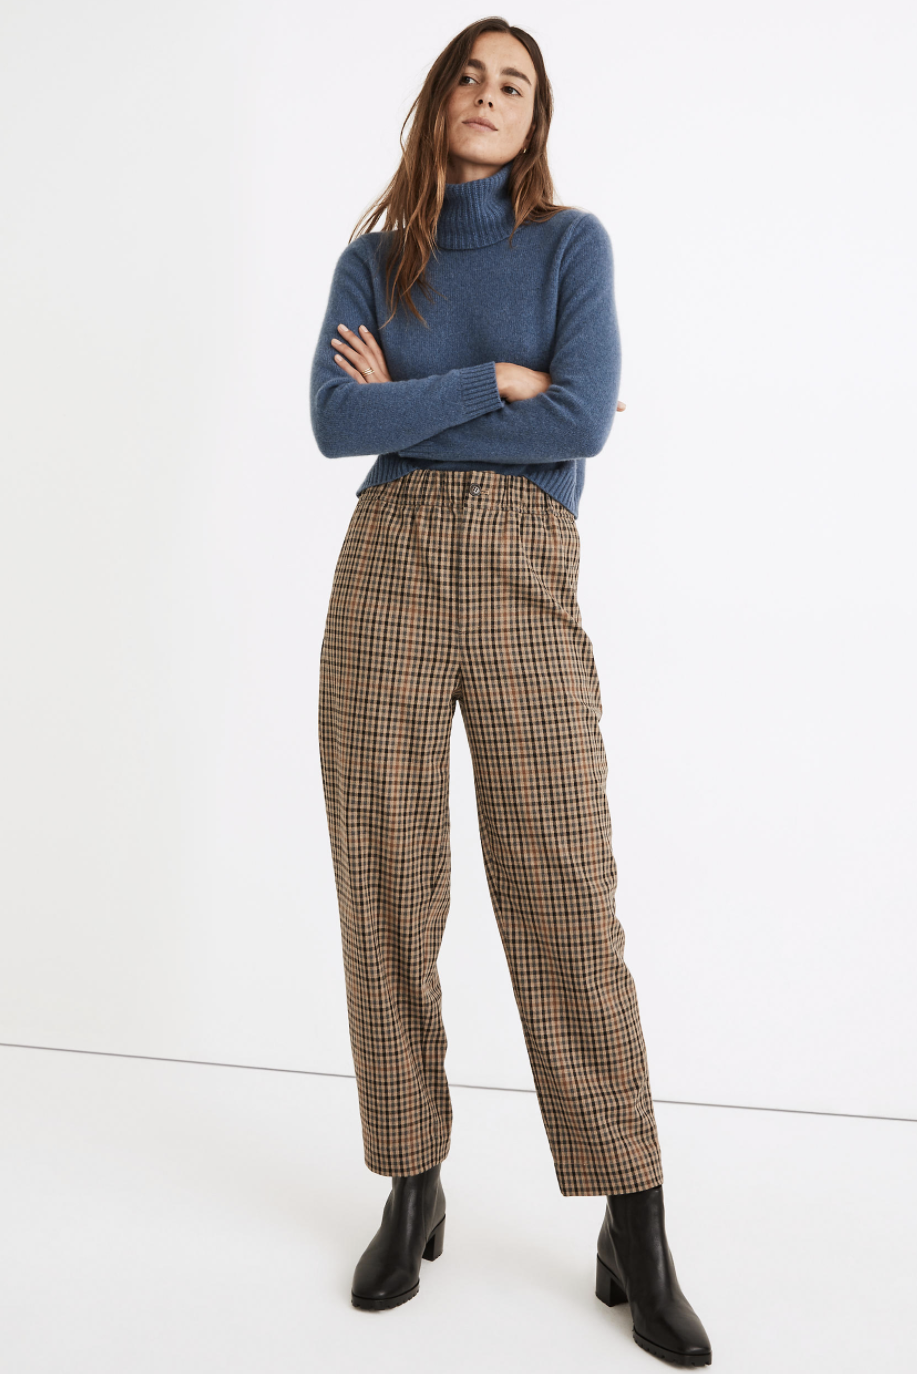 Madewell's Cyber Monday Sale 2021: What to Know and Best Deals So Far